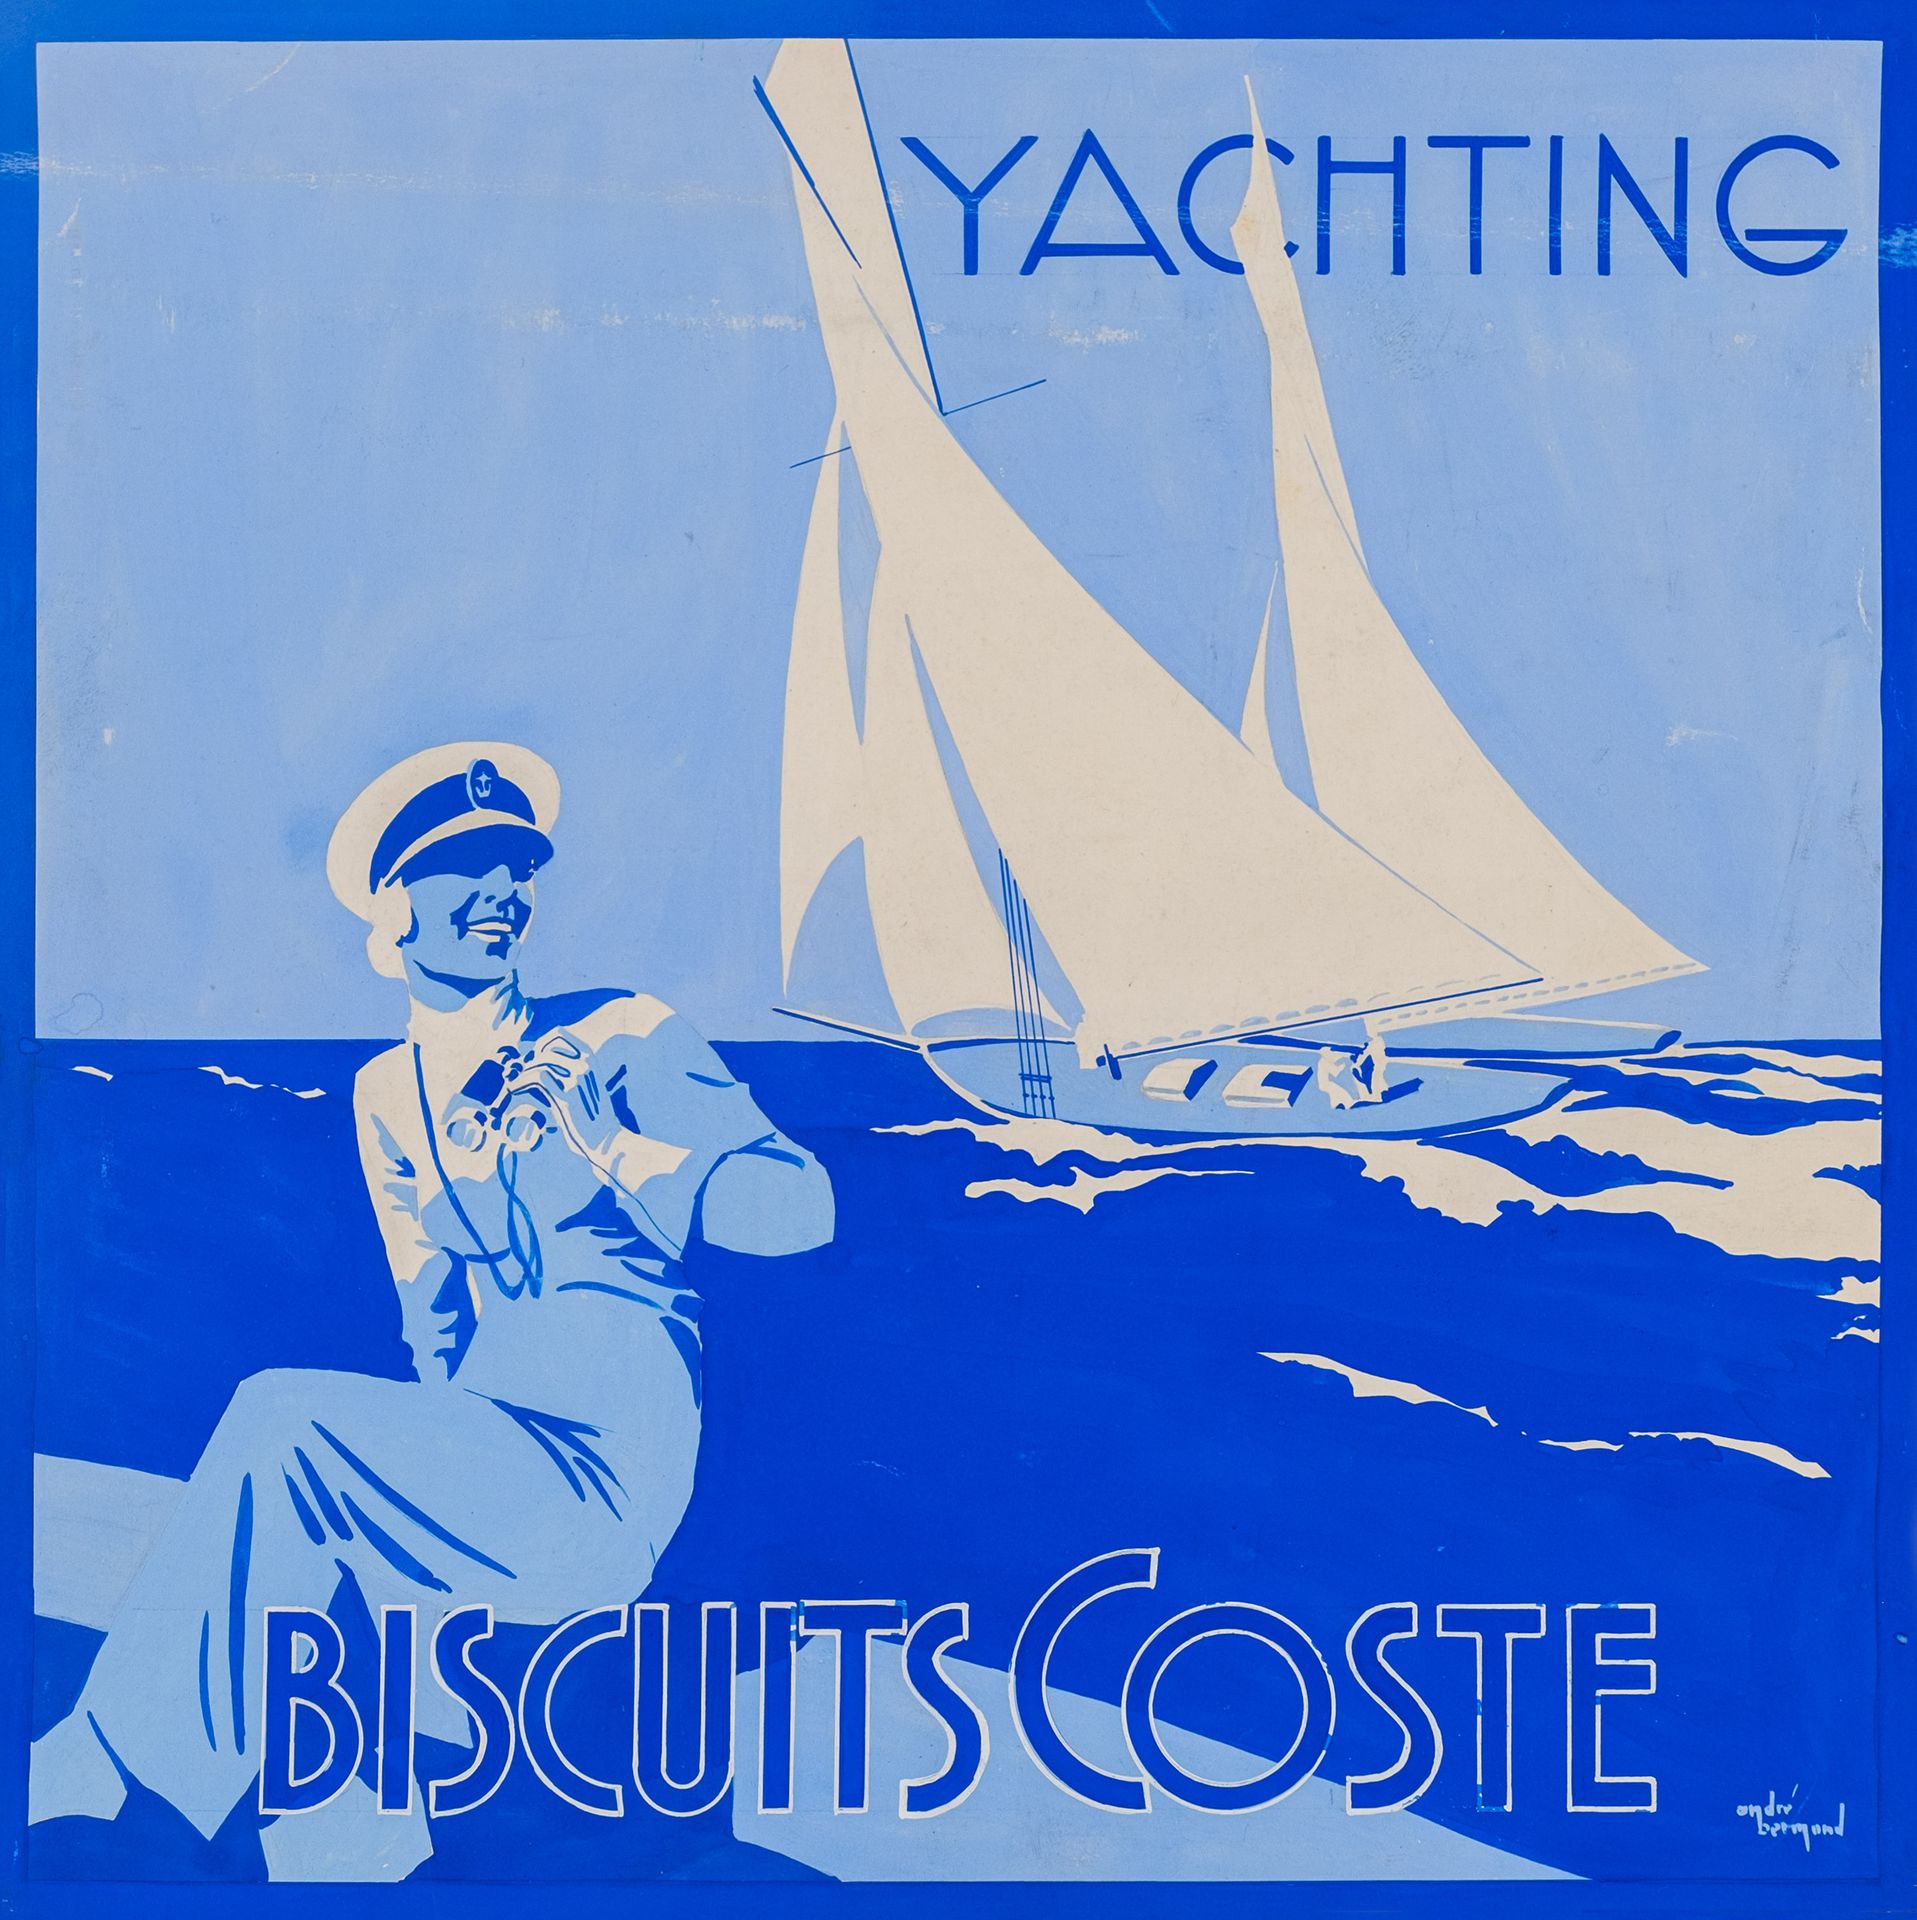 Null André BERMOND (1903-1983)

Yachting -Biscuits Coste, c.1930

Maquette origi&hellip;